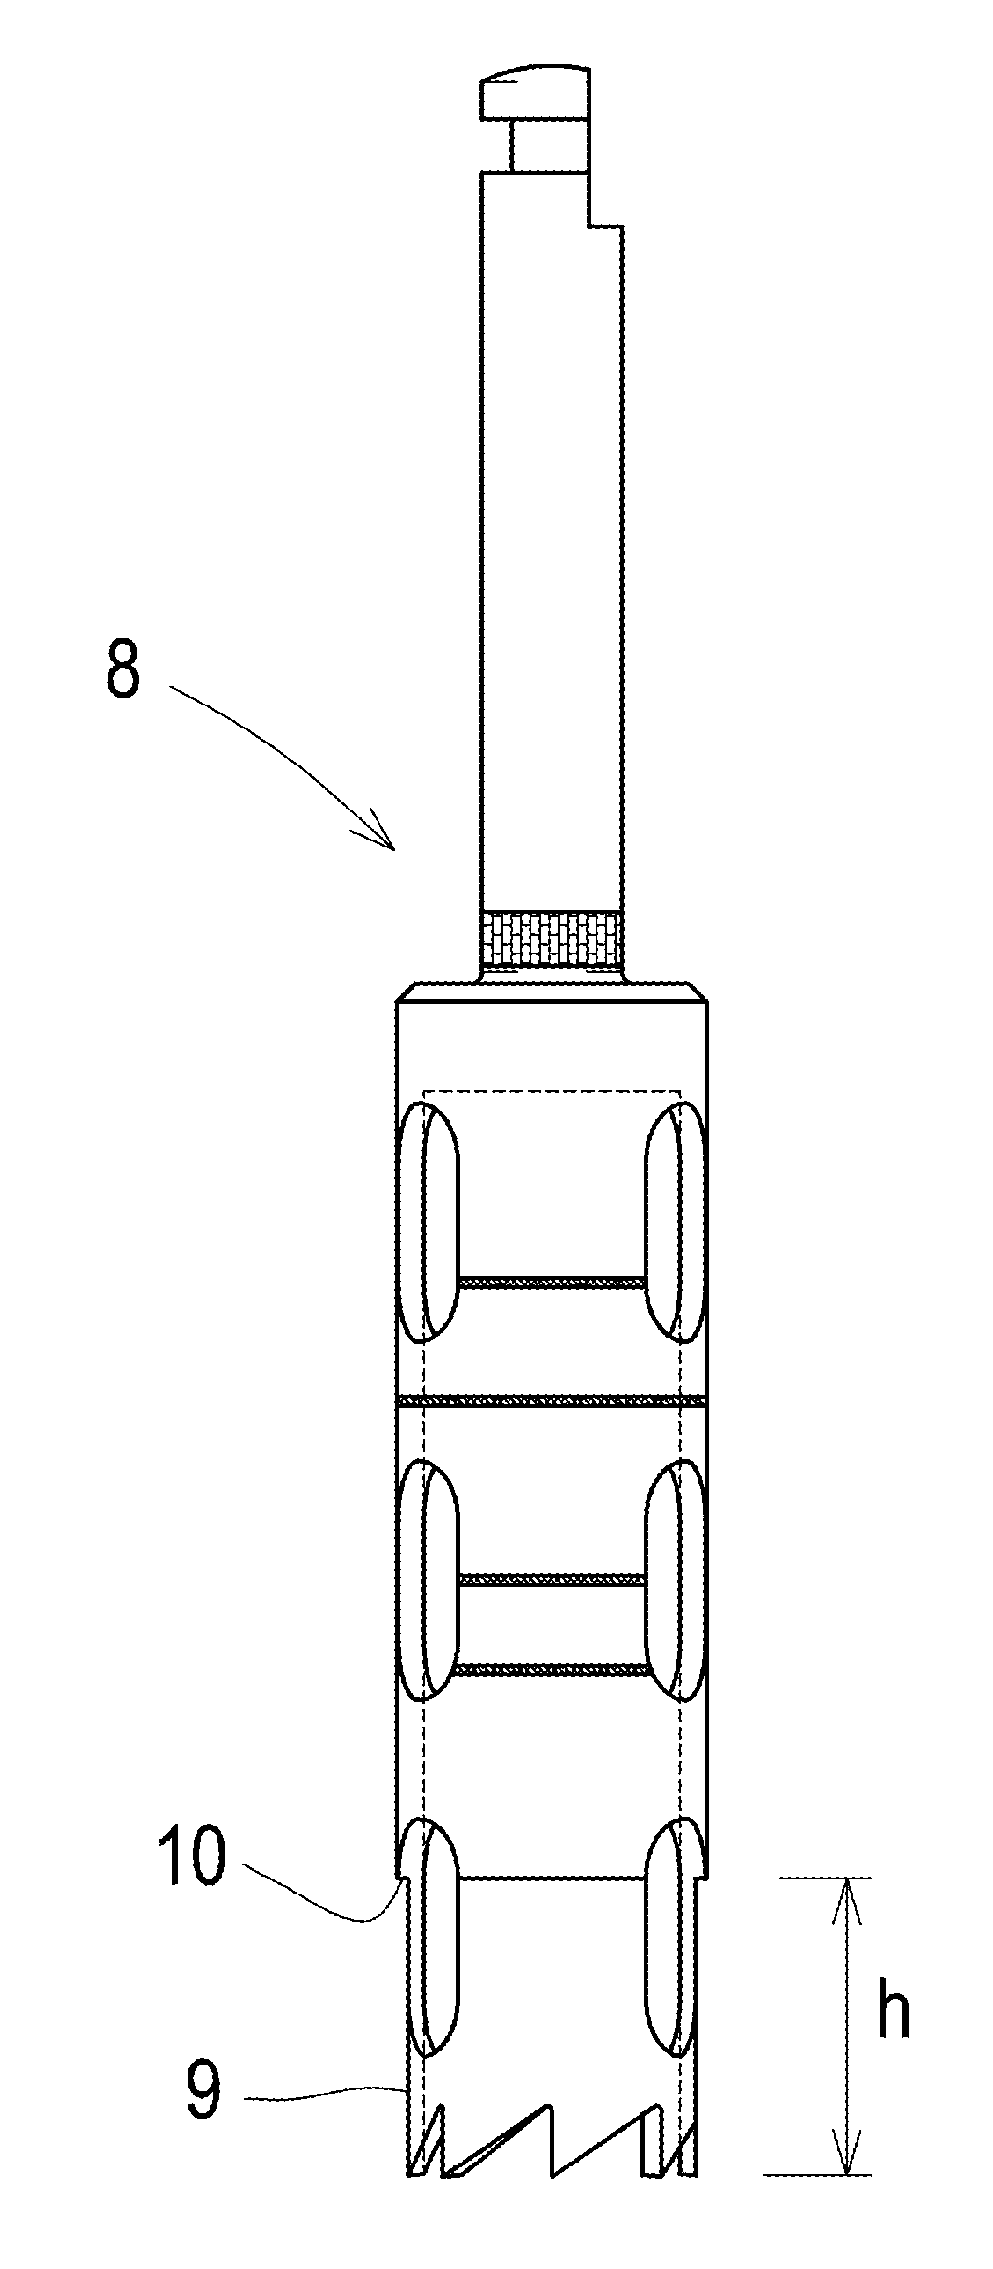 Implant extraction method and trephine drill bit for enabling the extraction